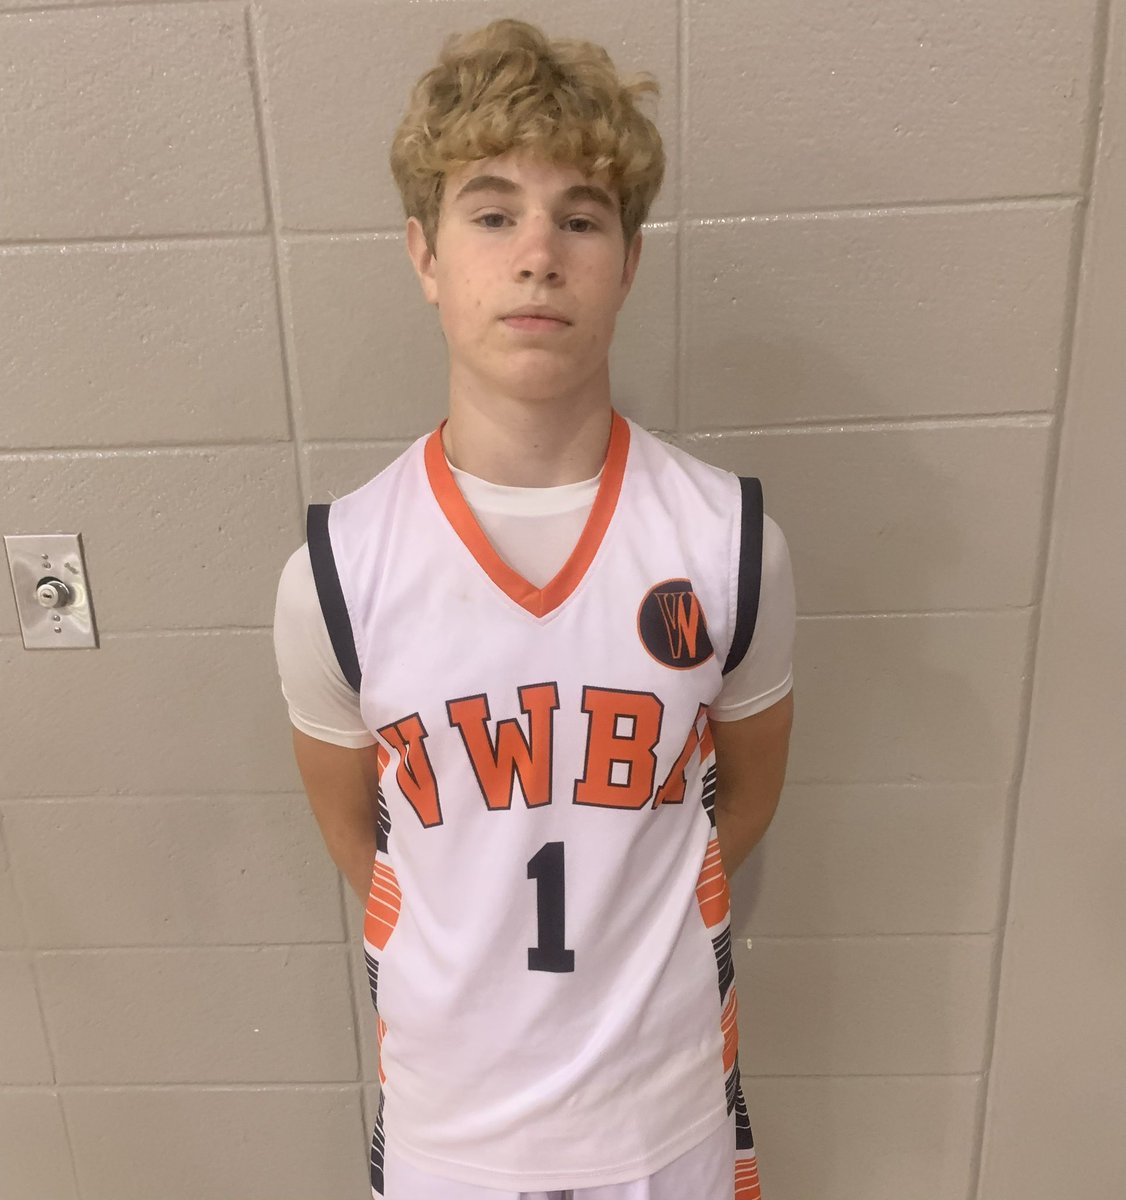 ‘26 G Adam Tanner and the entire @VWBAElite 15U squad put together an impressive weekend, going undefeated at Elite 32. Tanner is a true point guard that doesn’t turn the ball over and initiates great offense. Finished with 25 points this morning. @adamtanner2026